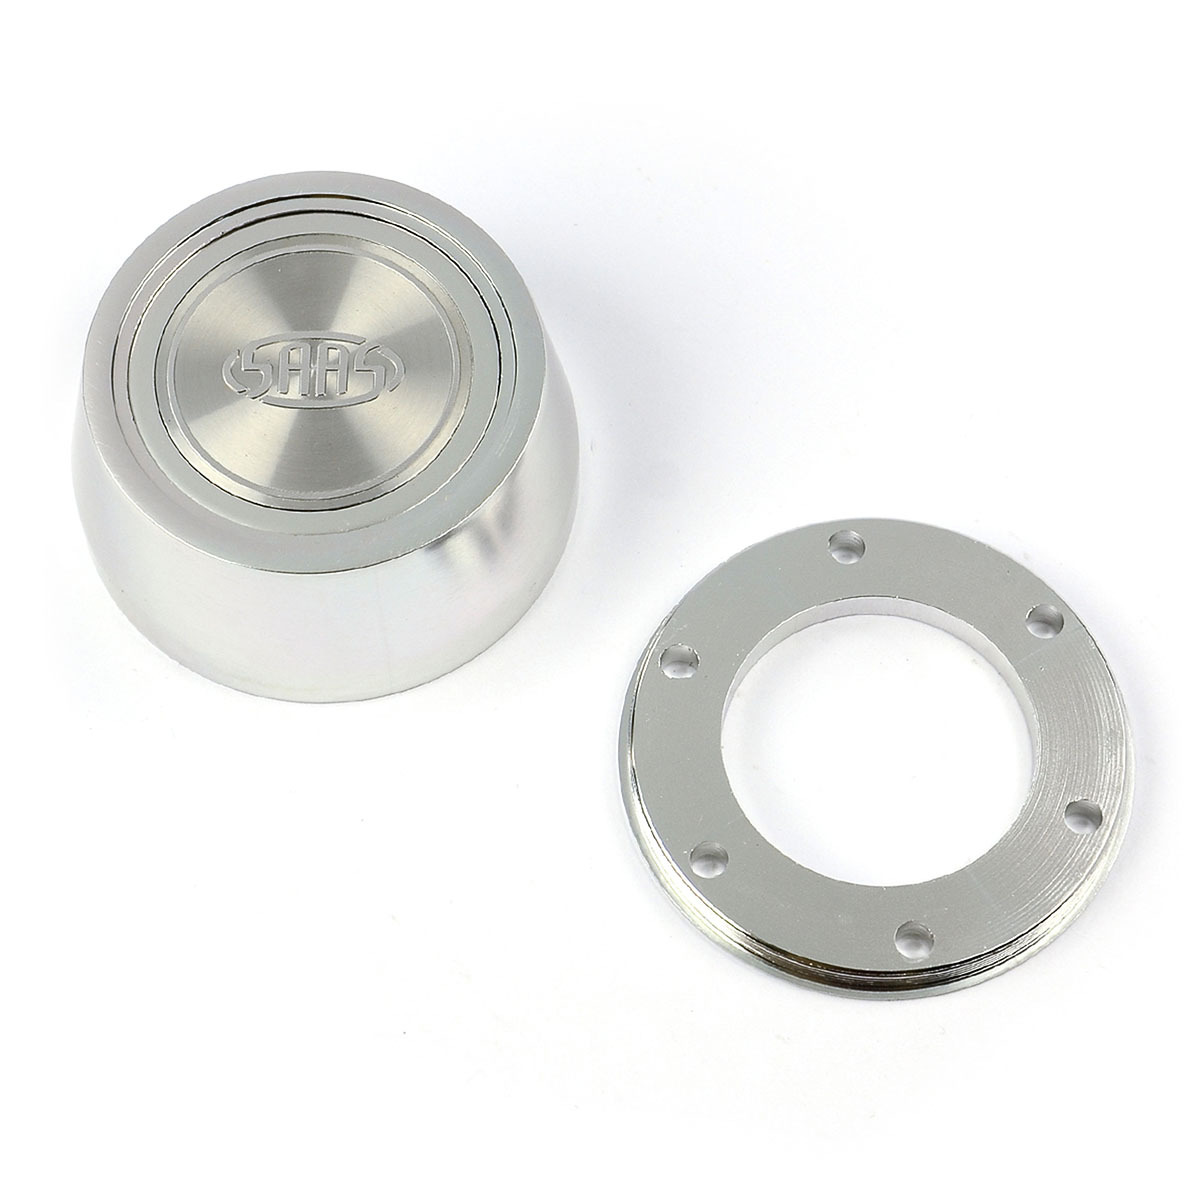 Horn Button Brushed Alloy Billet Tall Suit Deep Dish